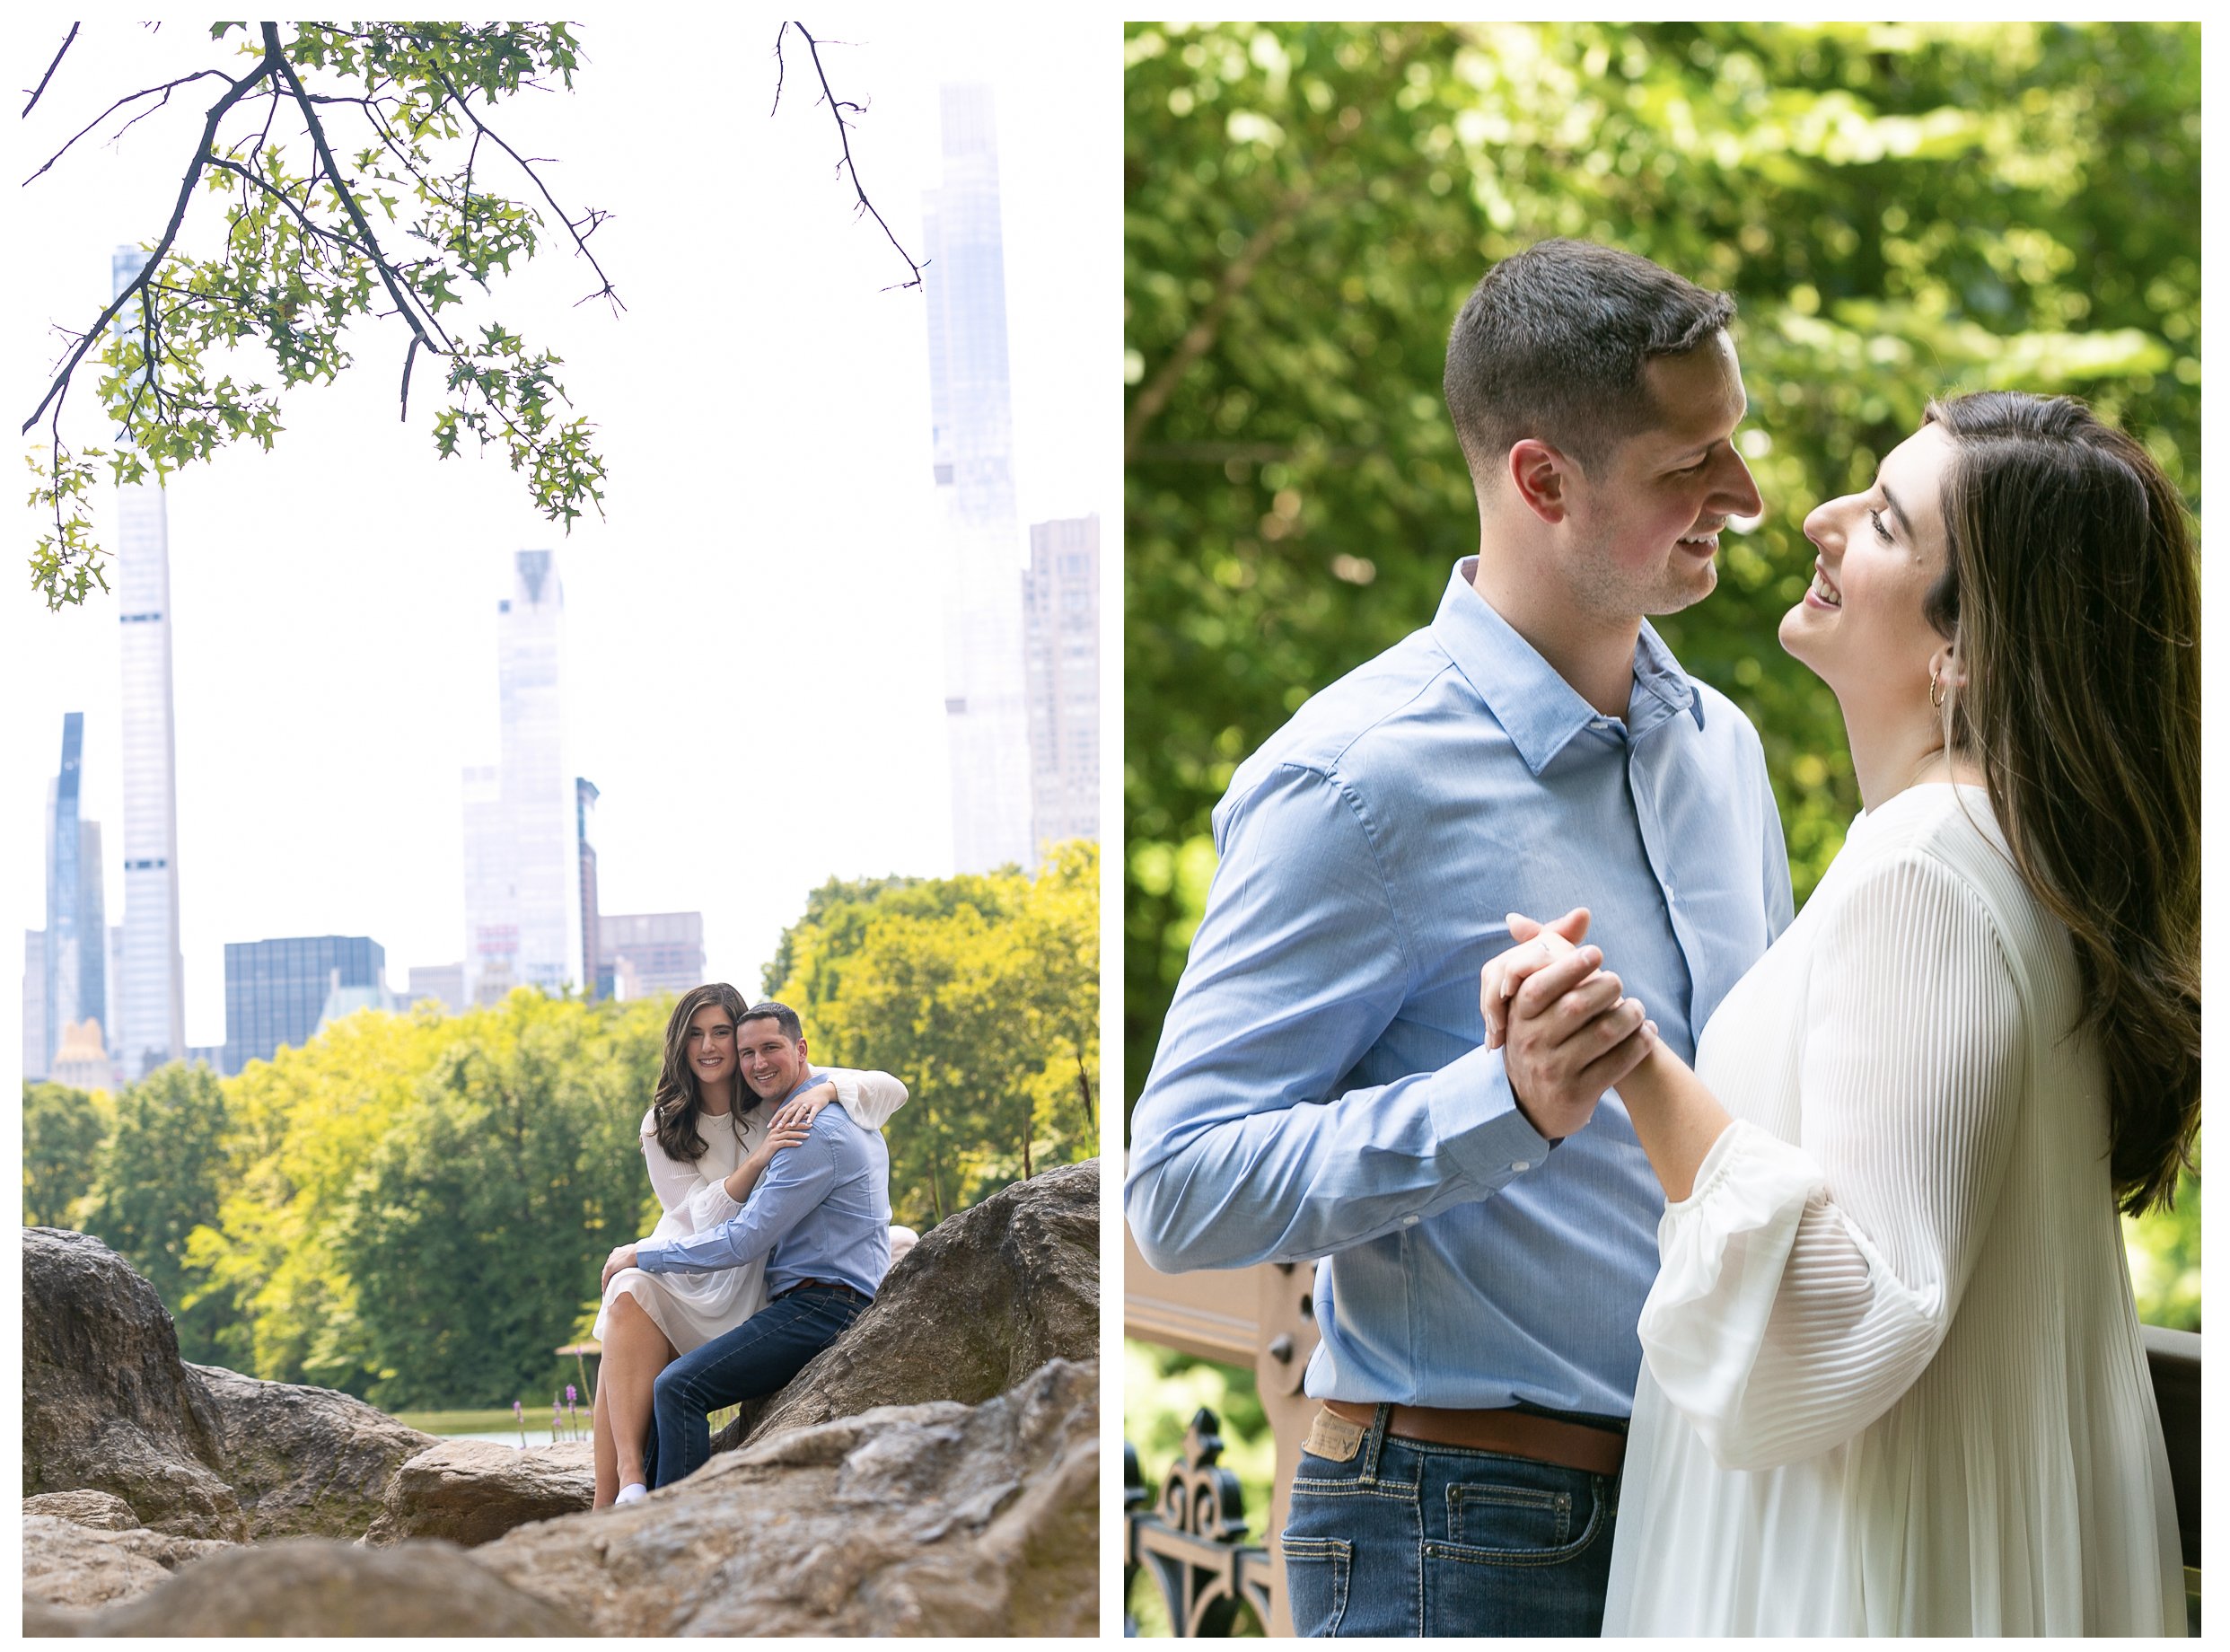 Central Park Engagement Photographer nyc _ 0004.jpg